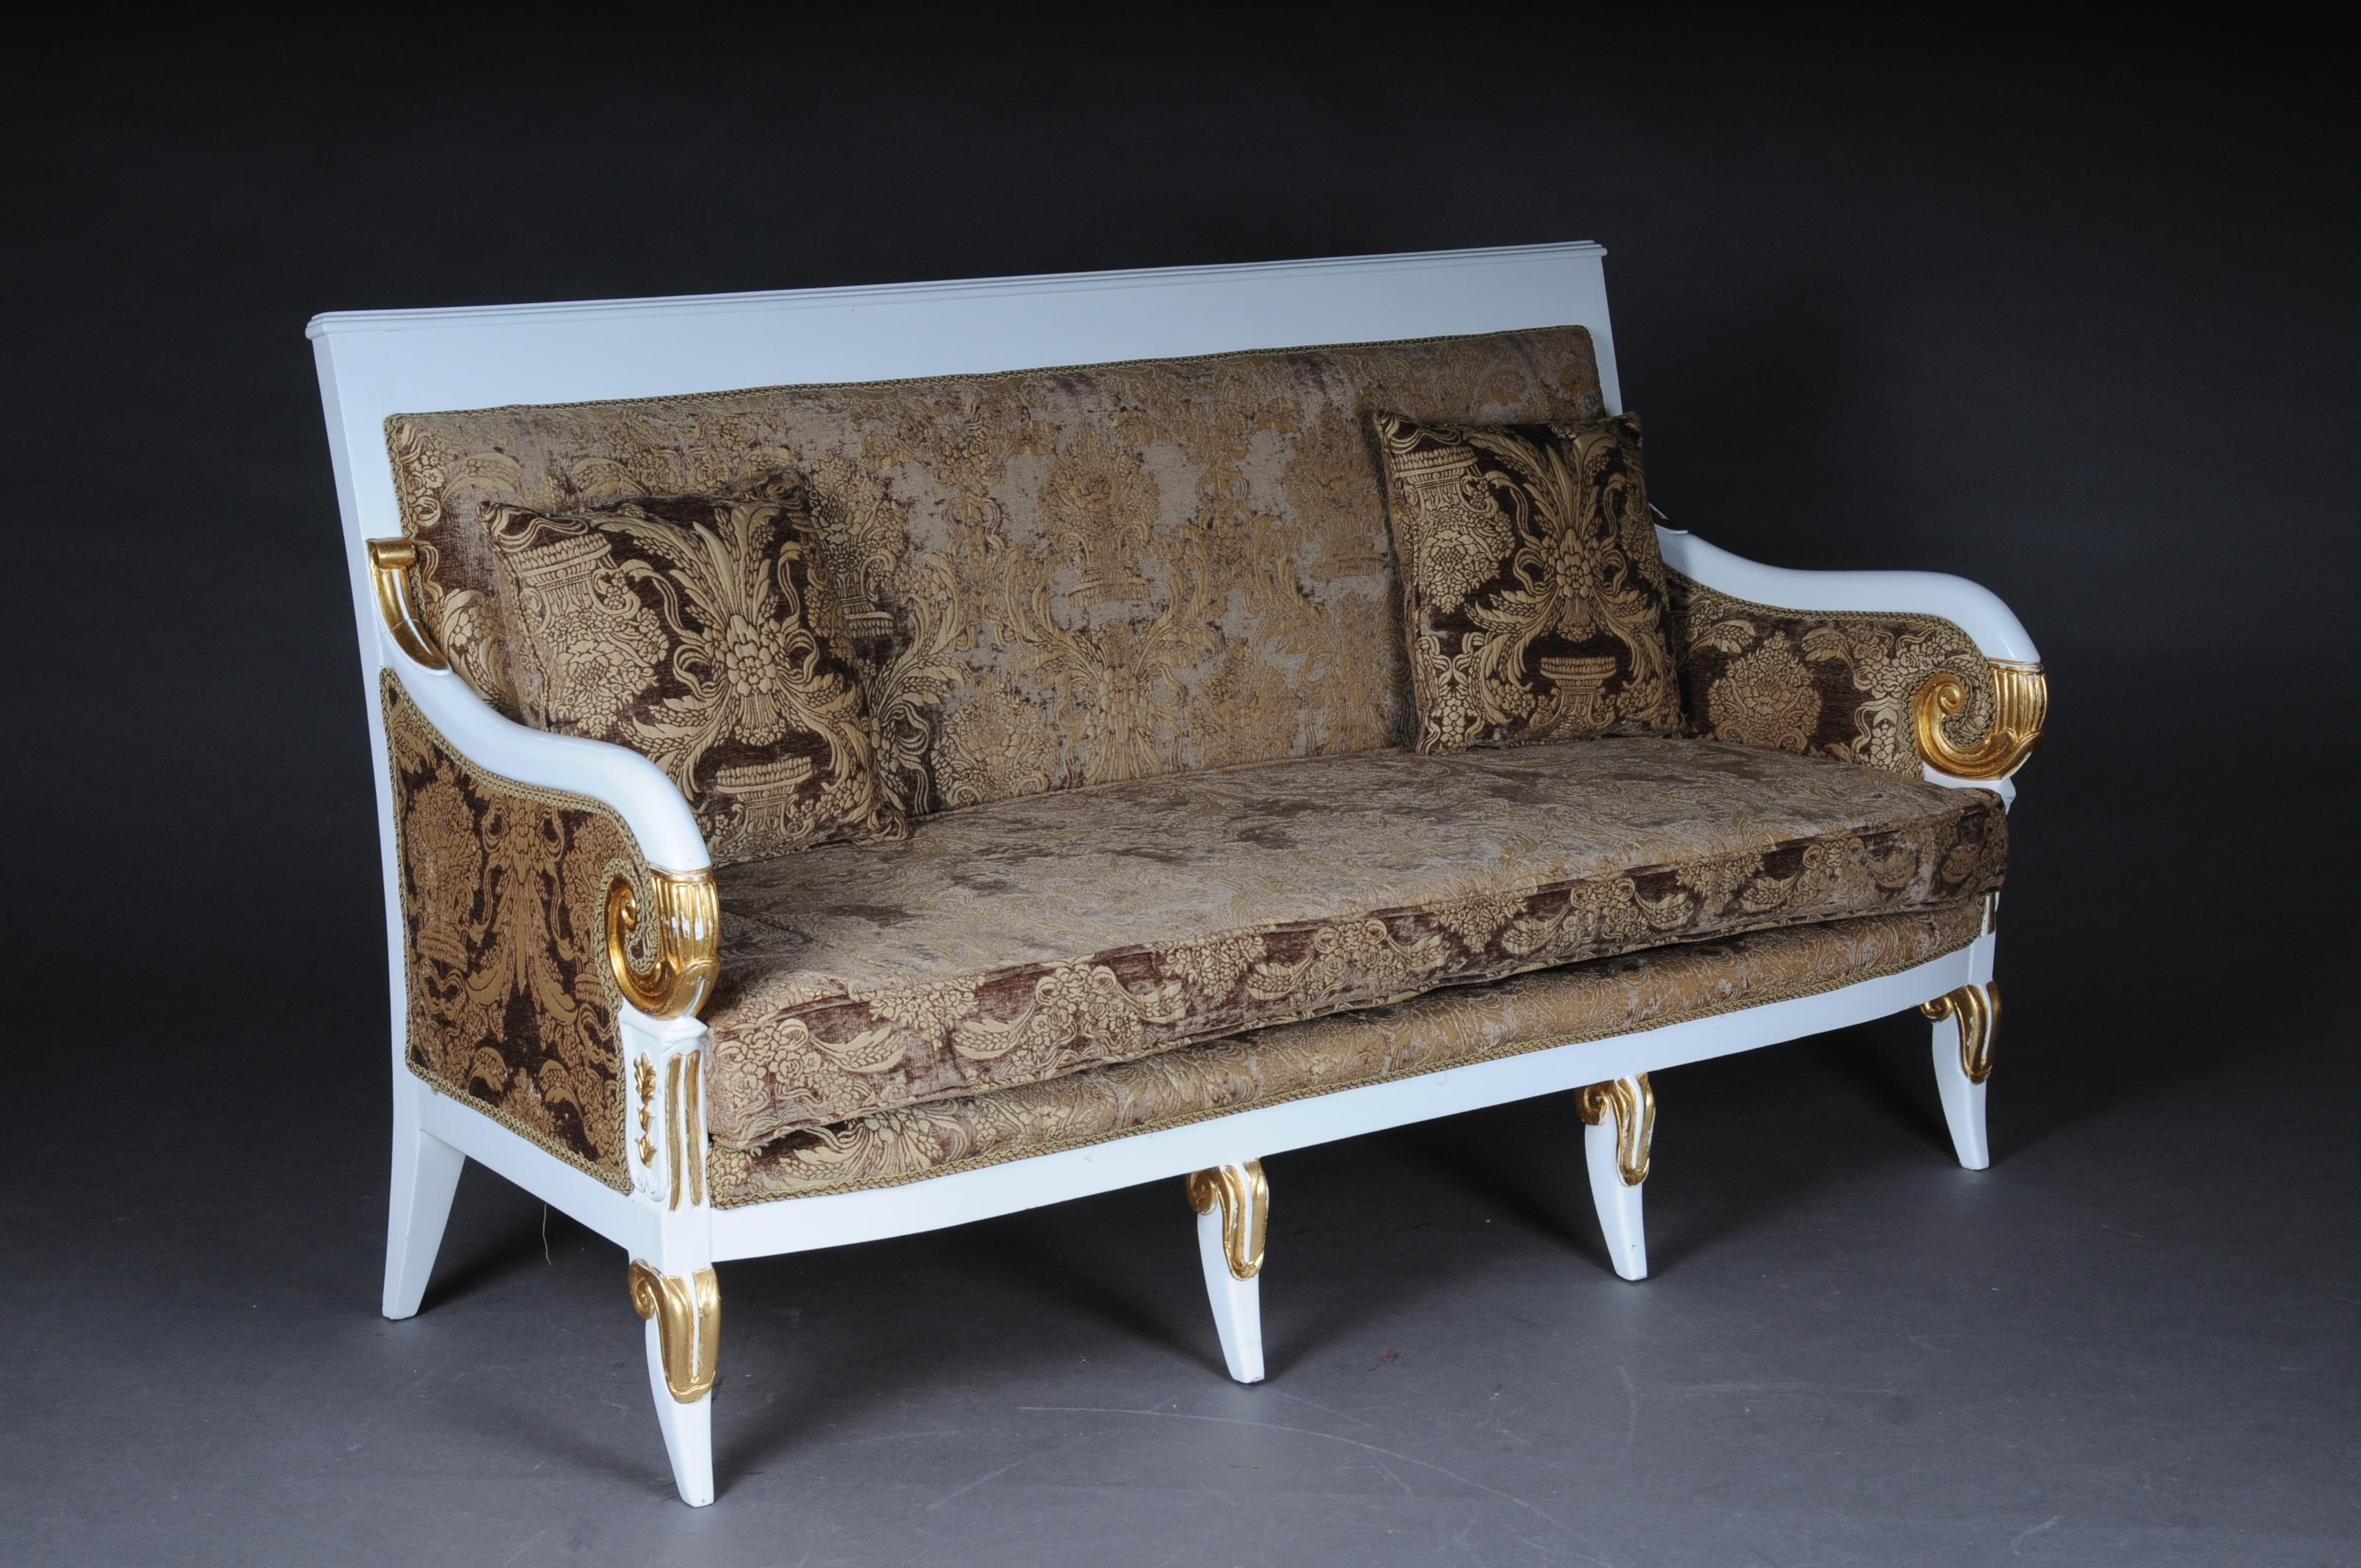 Hand-Carved Empire Salon Seating Group with Side Tables Set Ameublement For Sale